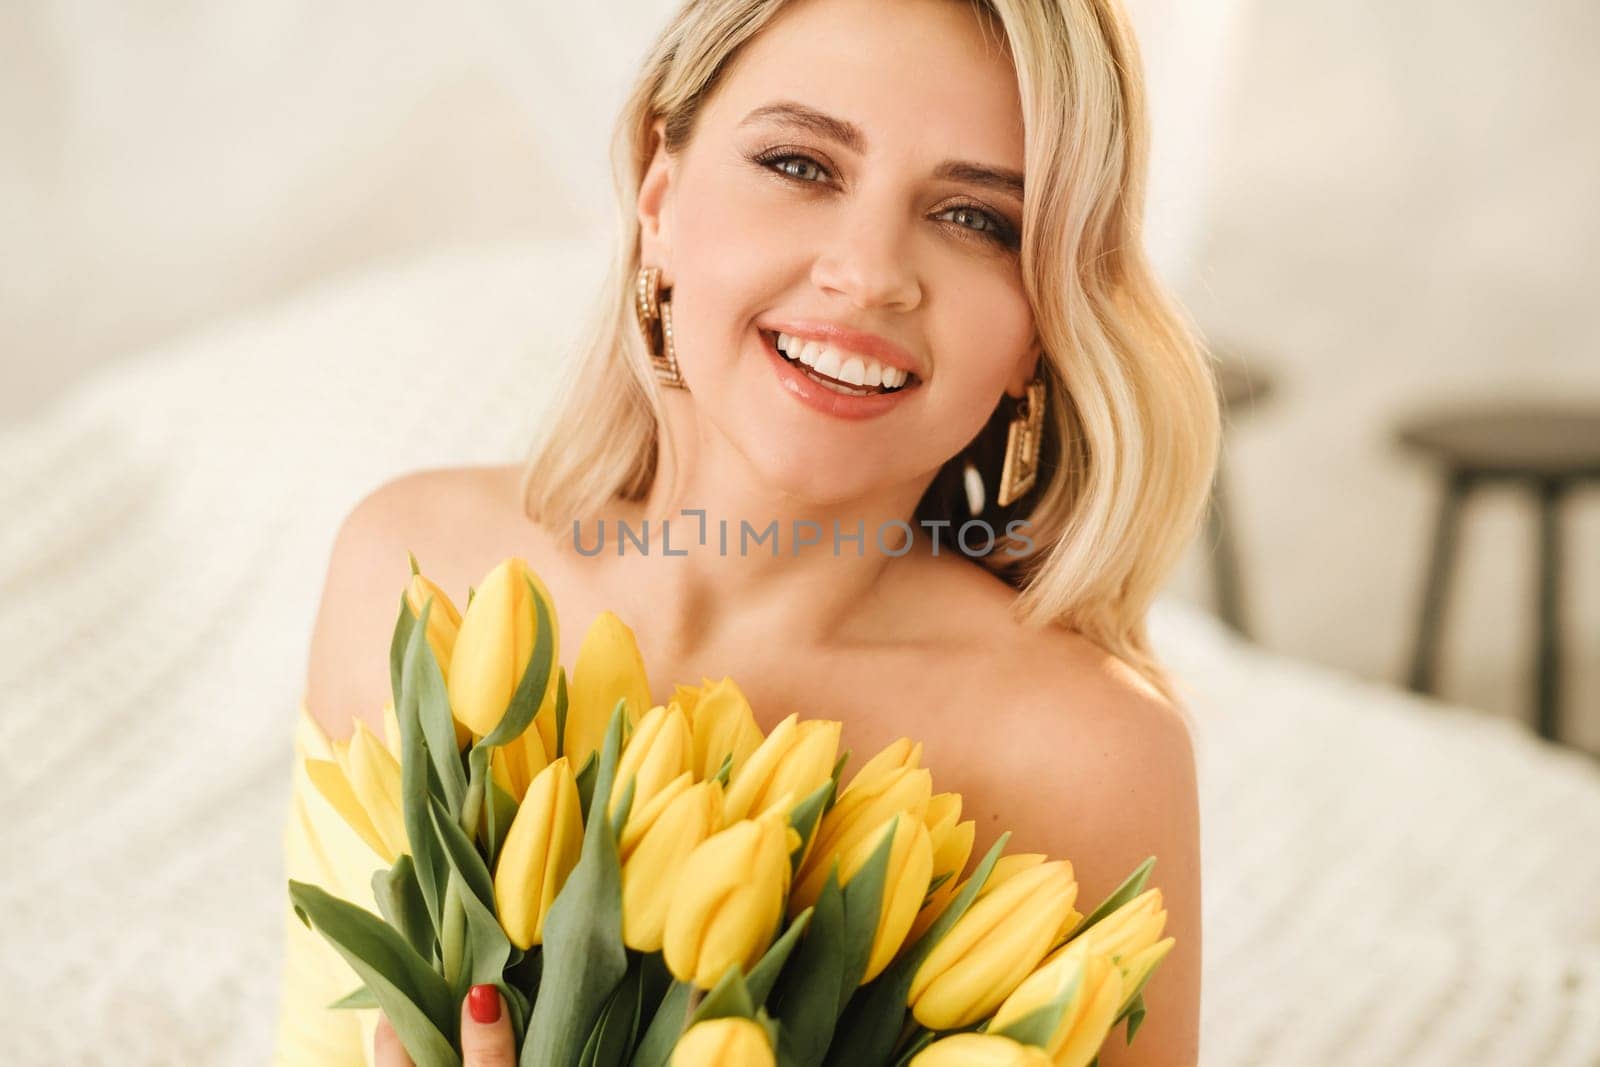 a happy woman in a yellow dress embraces a bouquet of yellow spring tulips in the interior.